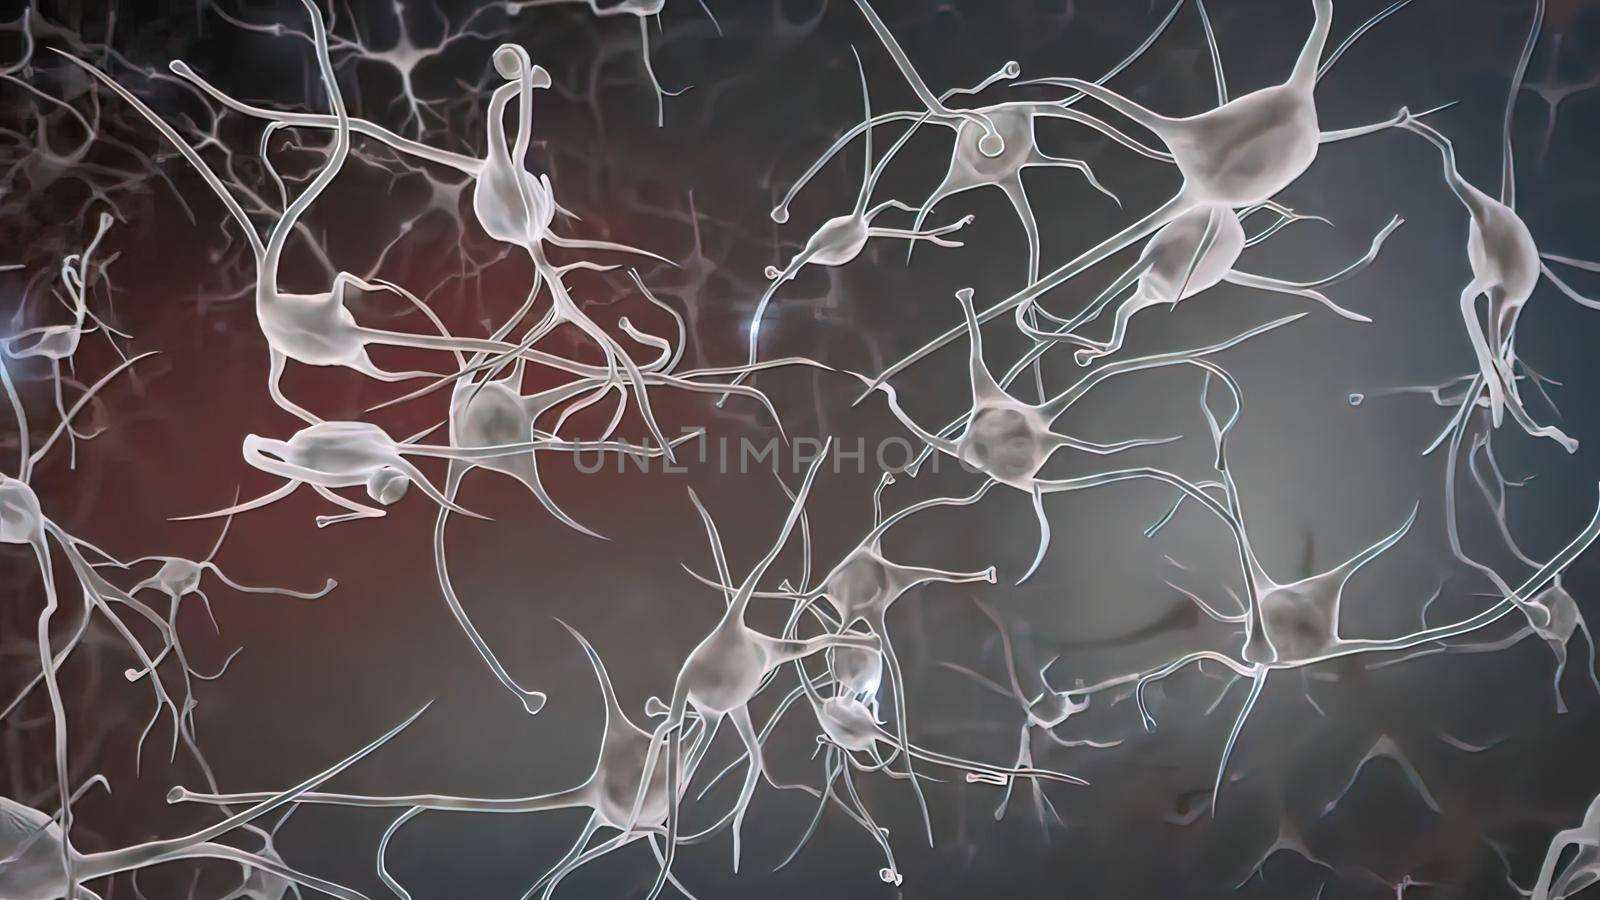 Electrical impulses between neuronal connections 3d illustration